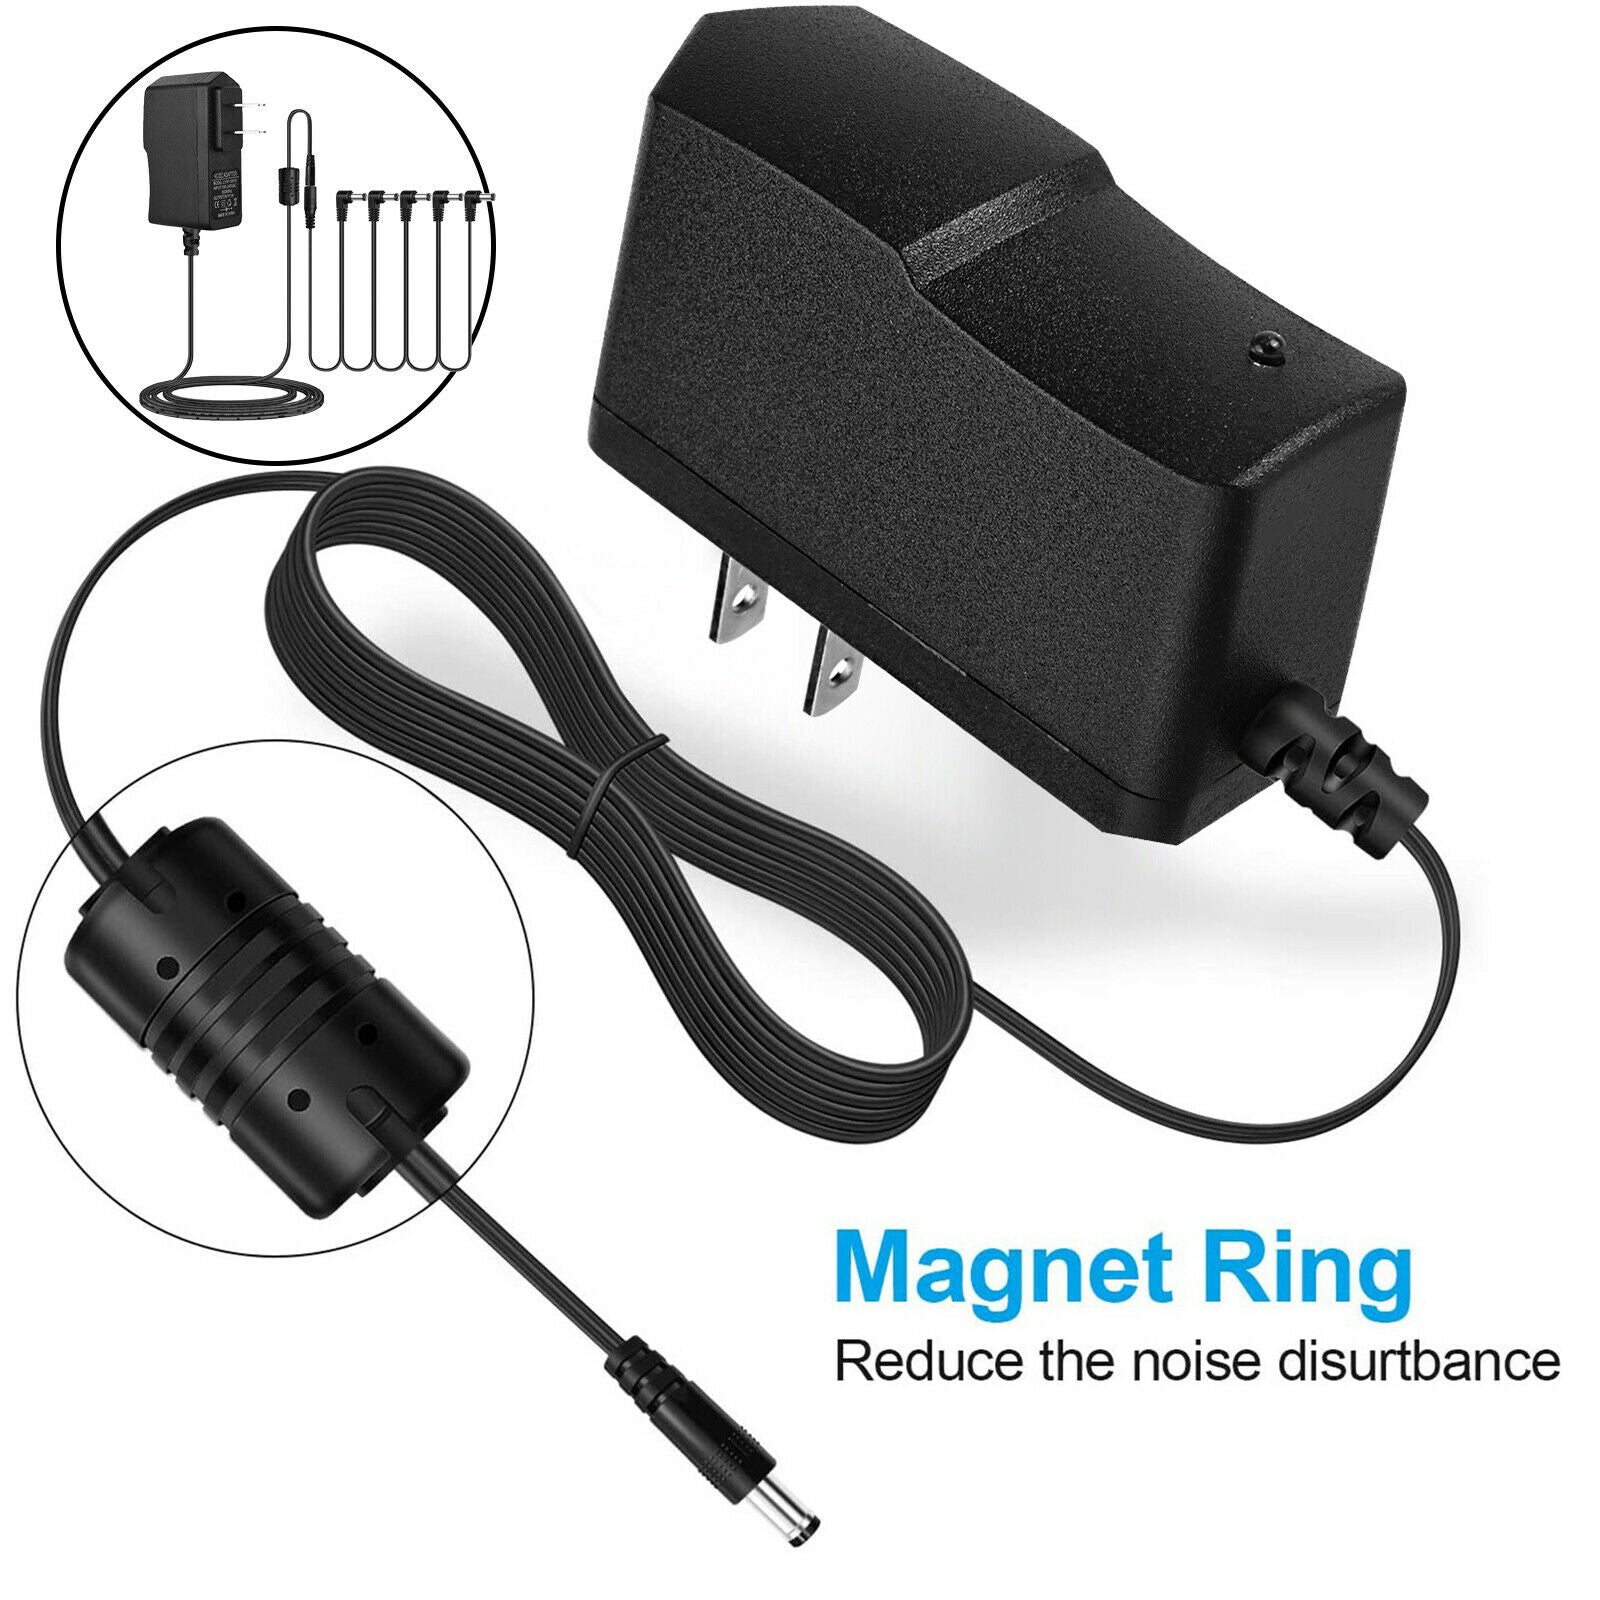 1pc 9V Power Adapter Cable for Guitar Pedal 5 Way Cord for Charging Speaker